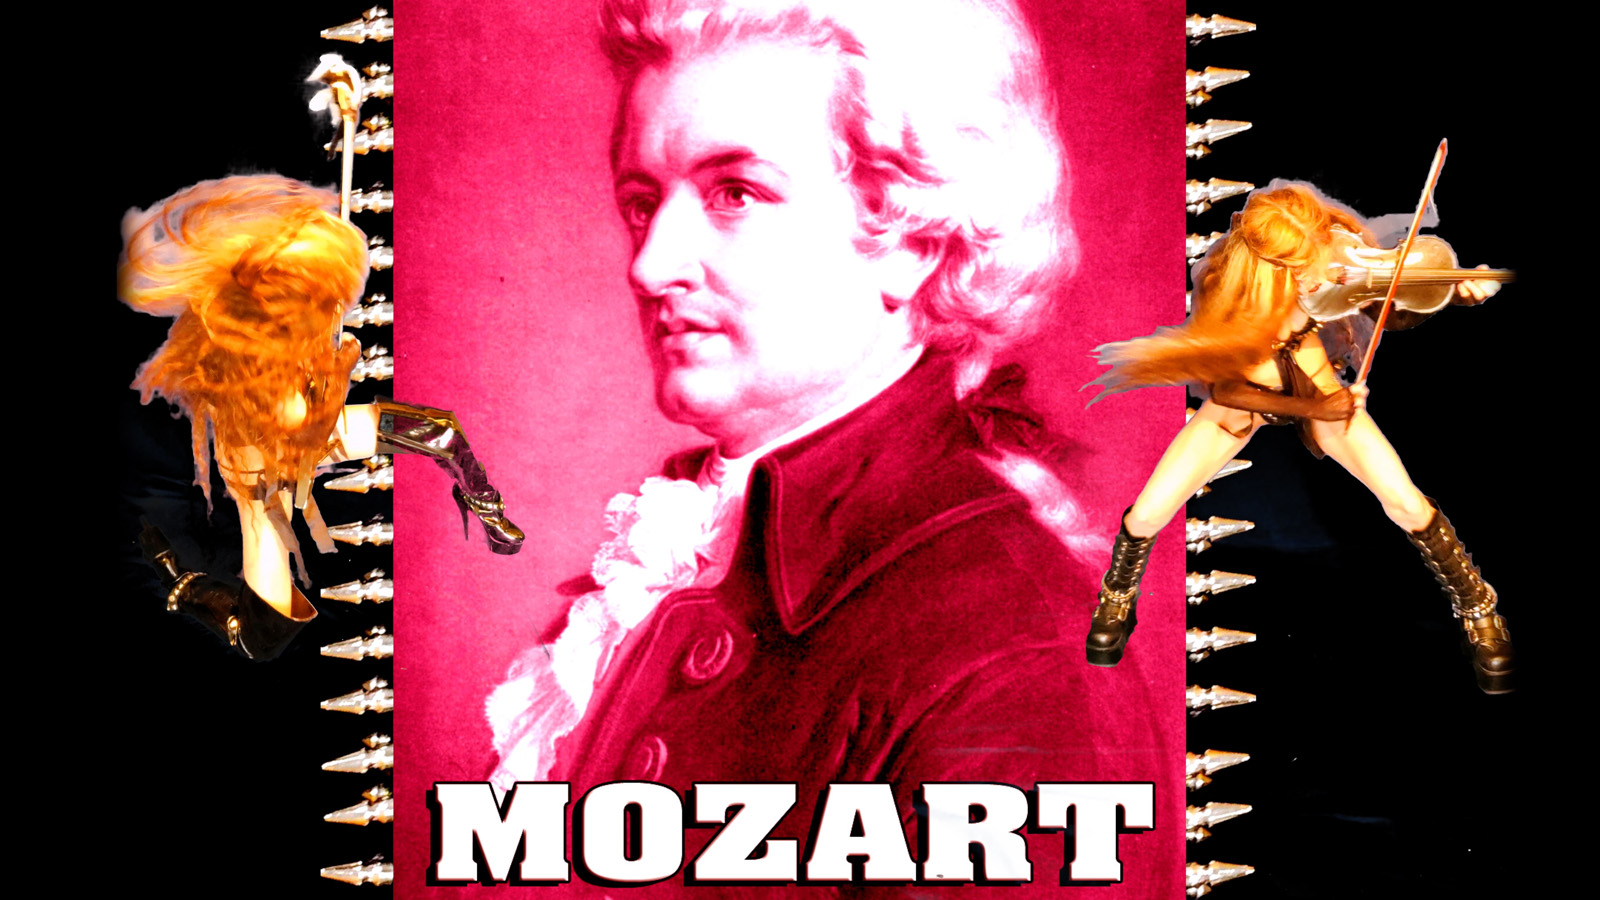 METAL MOZART! MOZART'S THE MARRIAGE OF FIGARO OVERTURE by THE GREAT KAT!